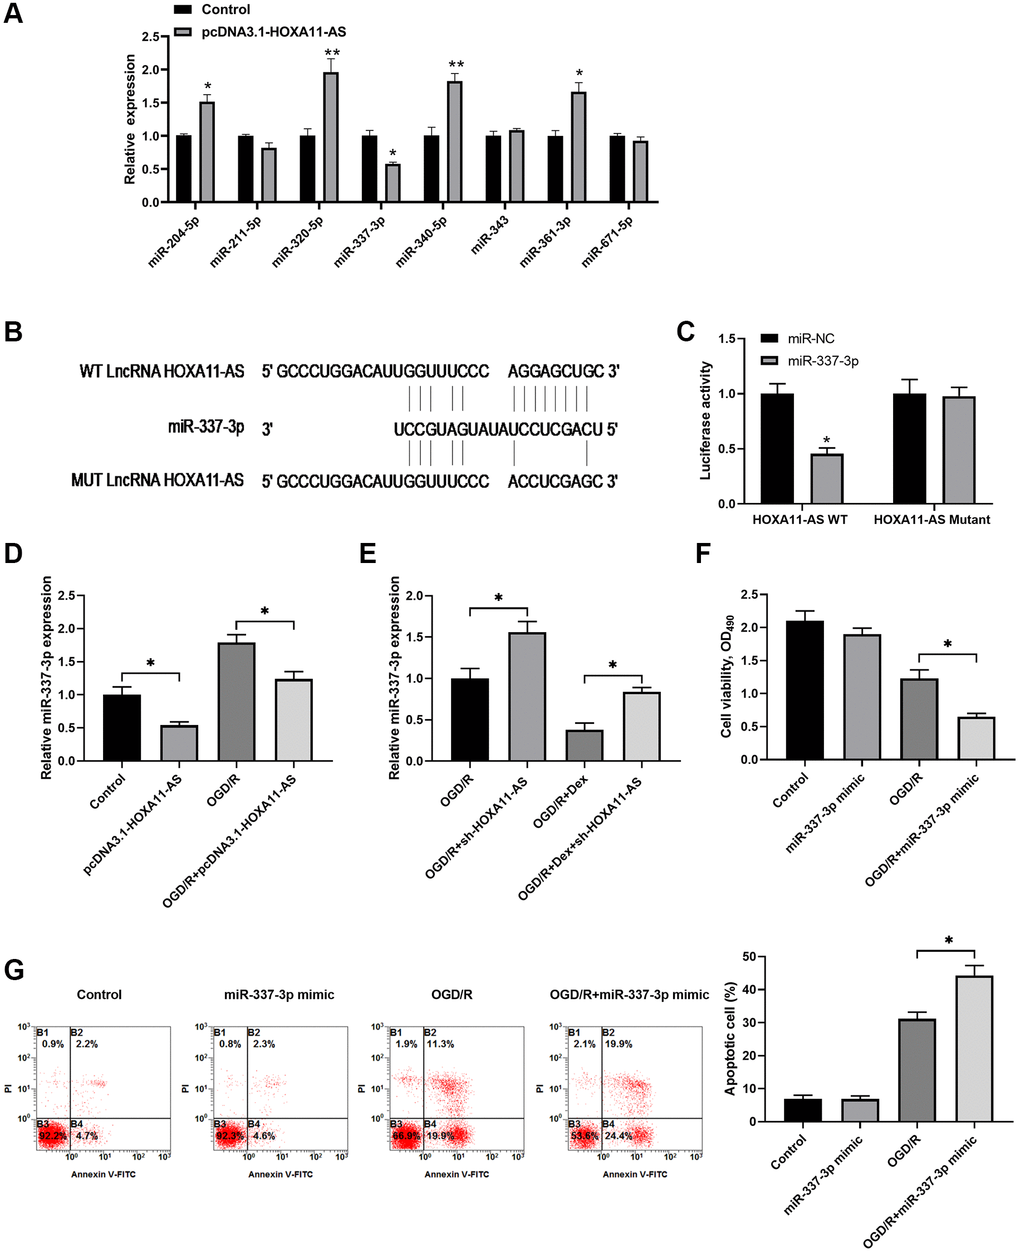 HOXA11-AS competed binding to miR-337-3p to silence miR-337-3p and inhibit apoptotic cell. (A) Neuro-2a cells were transfected with control empty vector or pcDNA3.1-HOXA11-AS vector, and the expression of candidate miRNAs was quantitated by quantitative real-time PCR. (B) Schematic diagram shows the HOXA11-AS transcript binding sites on miR-337-3p. The wild type (WT) and mutated (MUT) binding sites of HOXA11-AS are shown. (C) The luciferase activity of the reporter vectors was detected in Neuro-2a cells at 48 hours after co-transfection of the plasmid expressing wild type or mutant HOXA11-AS together with the NC mimic or the miR-337-3p mimic. (D, E) Neuro-2a cells were transfected with control empty vector or pcDNA3.1-HOXA11-AS vector, and were left untreated or received OGD/R (D). Neuro-2a cells transfected with control sh-RNA or sh-HOXA11-AS were left untreated or treated with 10 μM Dex. Cells were then subjected to OGD/R (E). The relative expression of miR-337-3p was quantitated. (F, G) Neuro-2a cells transfected with control miRNA mimics or miR-337-3p mimics were left untreated or received OGD/R. Cell proliferation (F) and apoptosis (G) in the indicated groups were measured. *P **P 